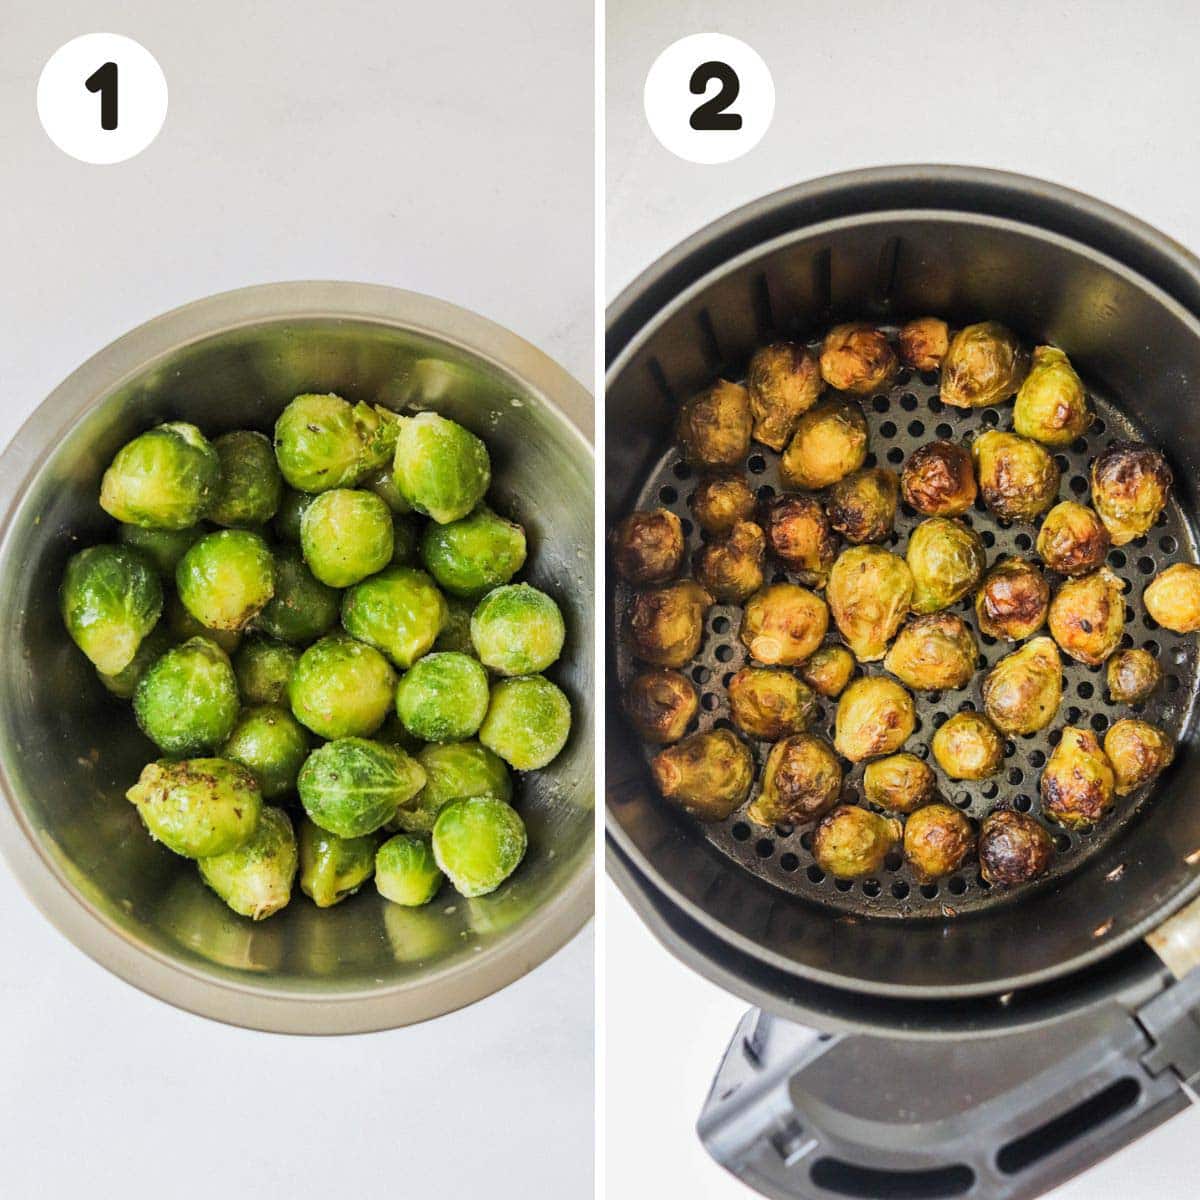 Steps to make the Brussels sprouts in the air fryer.